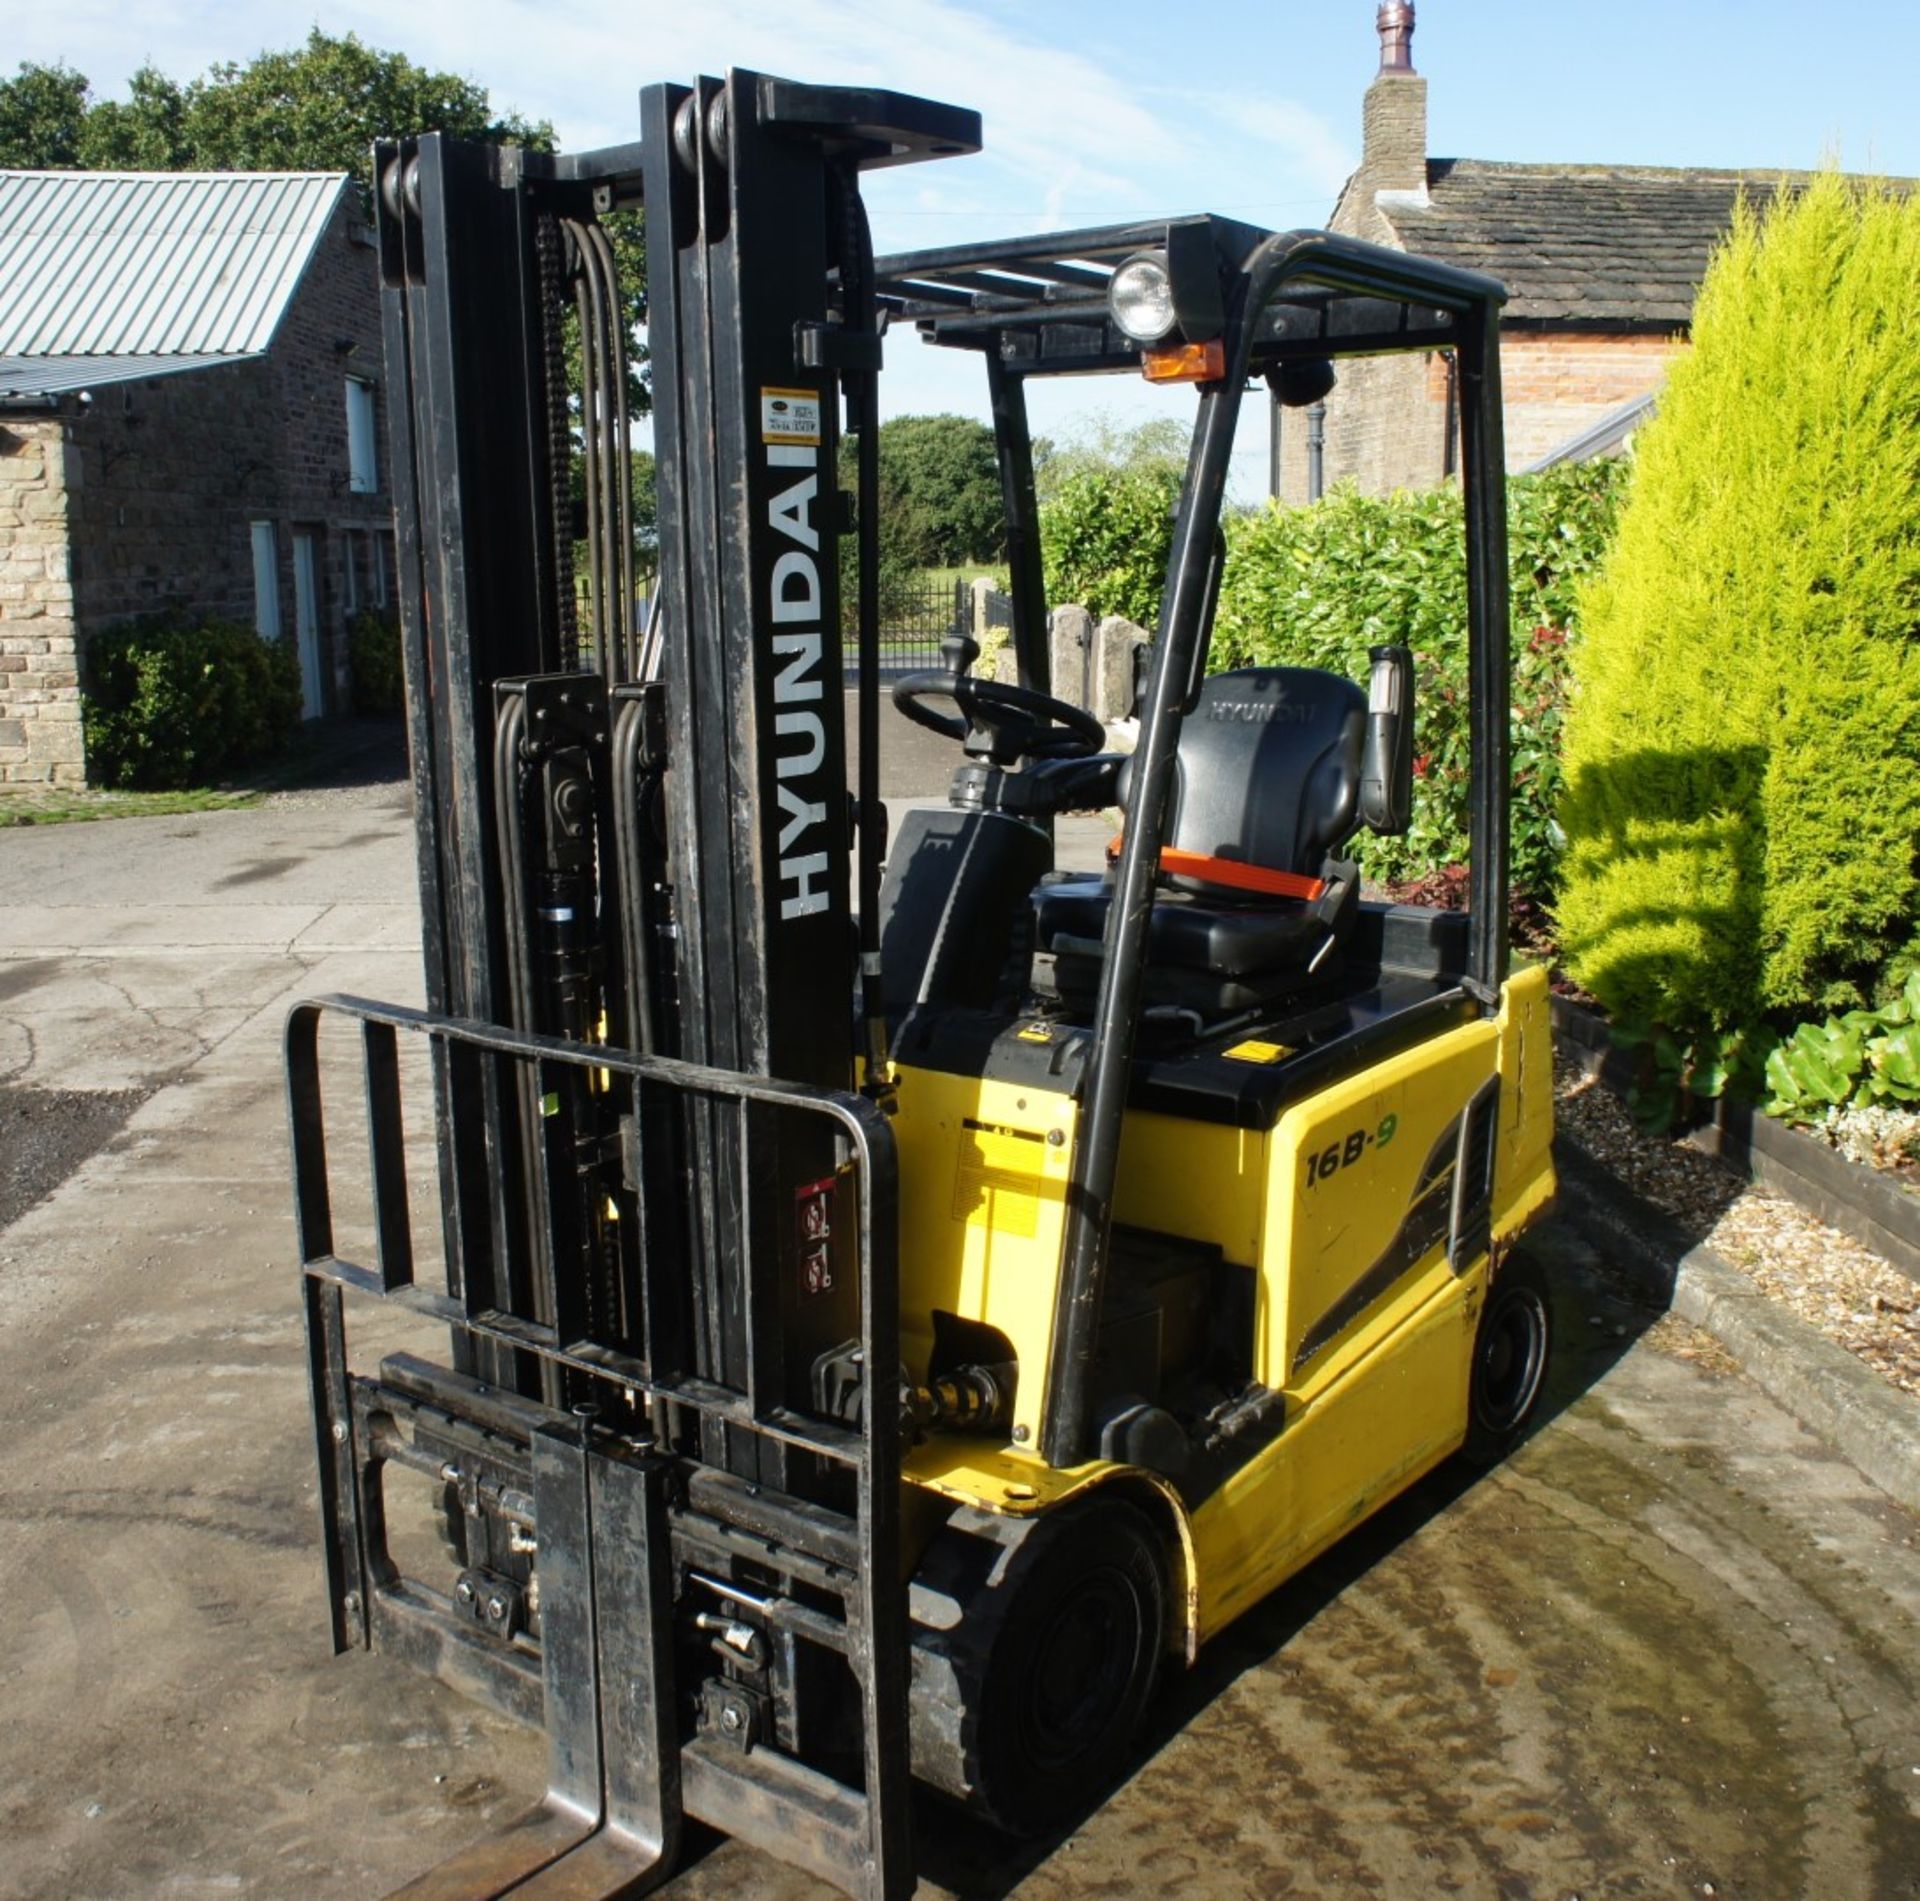 2016 Hyundai 16B-9 Electric Forklift, 1370kg rated capacity, container spec triple mast, 4750mm lift - Image 6 of 18